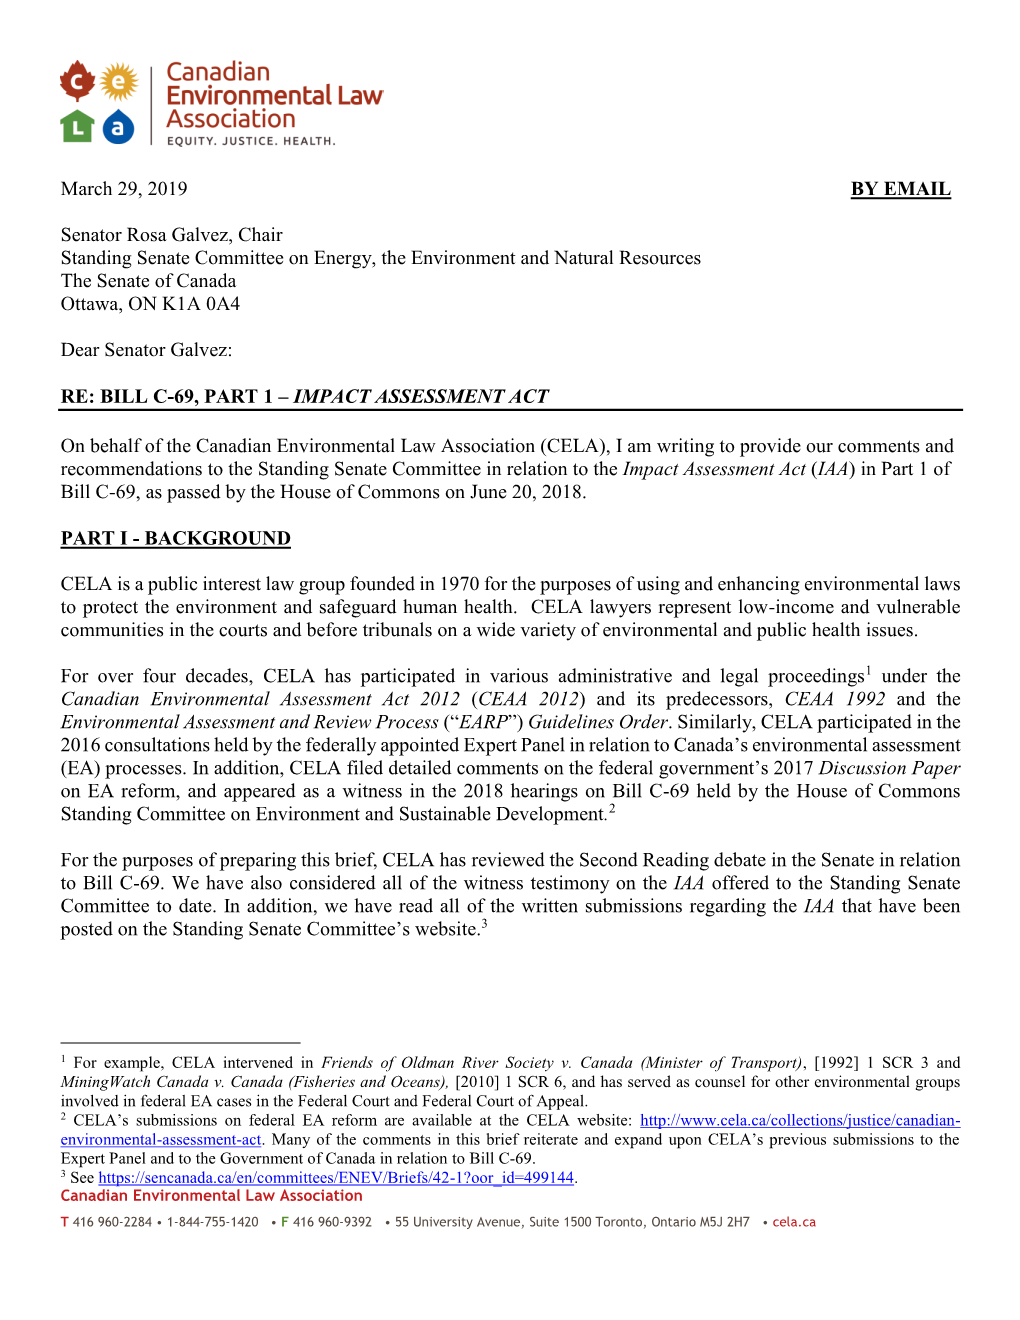 March 29, 2019 by EMAIL Senator Rosa Galvez, Chair Standing Senate Committee on Energy, the Environment and Natural Resources Th